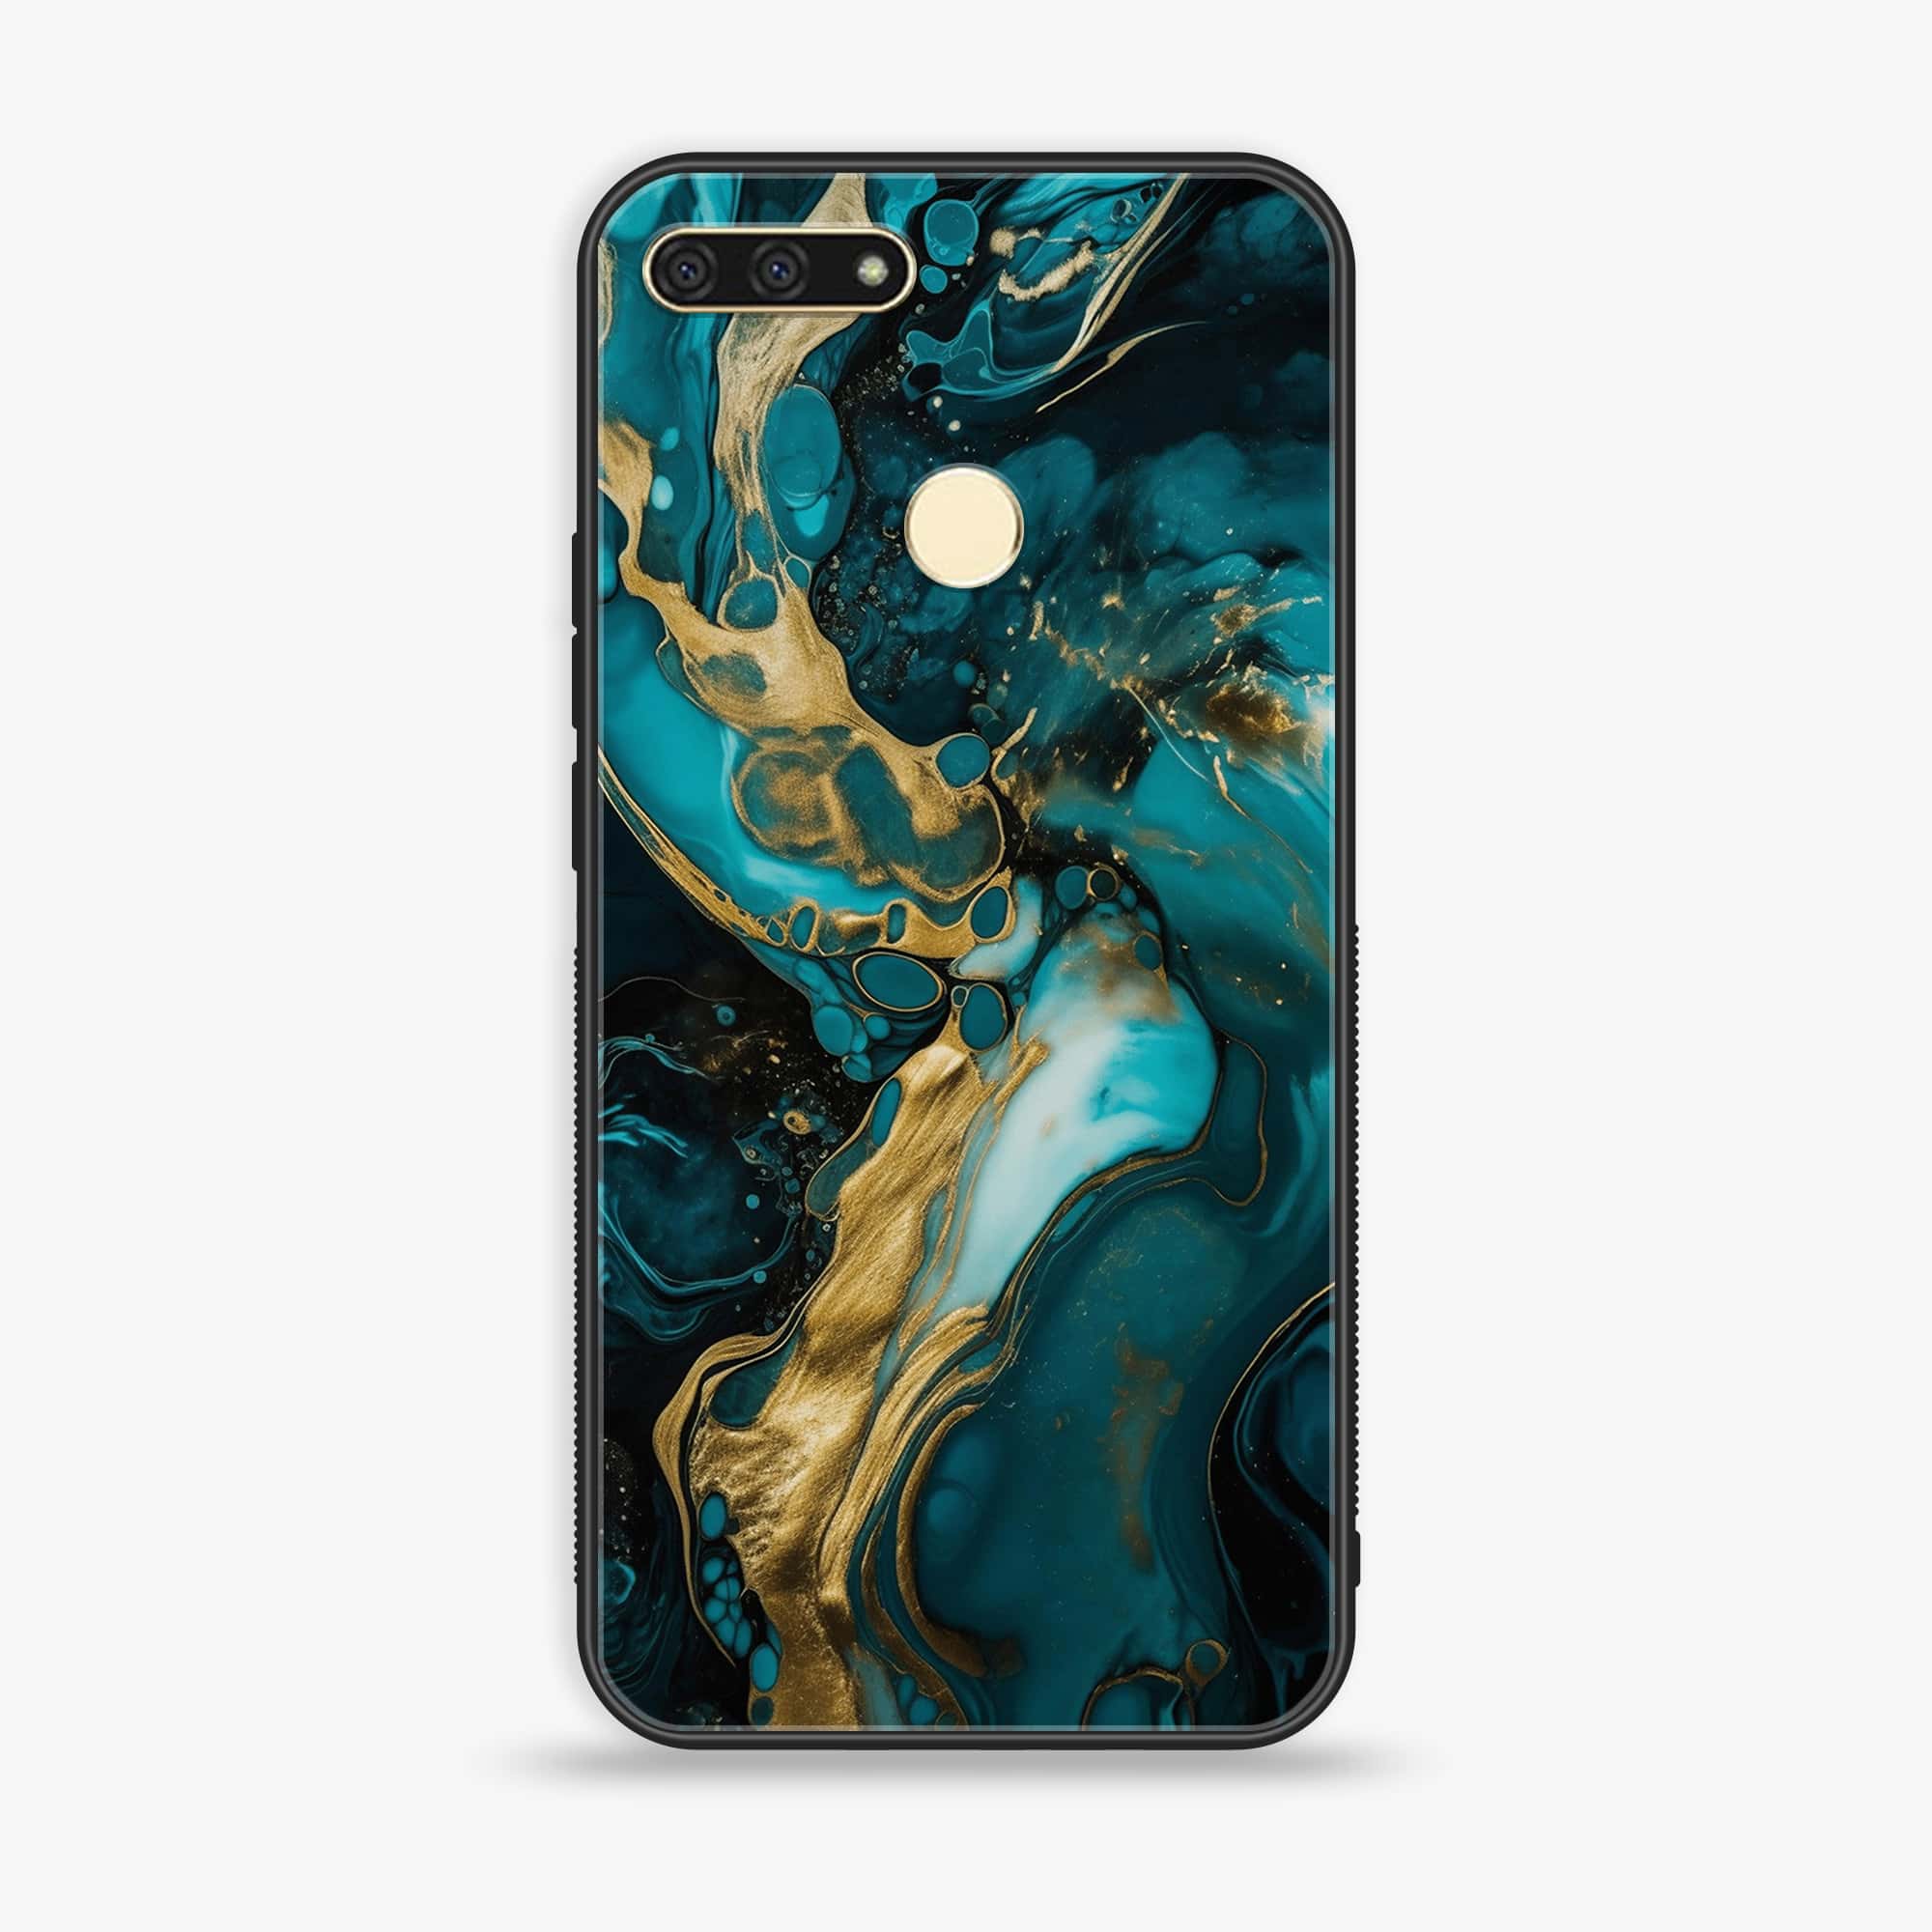 Huawei Y6 2018/Honor Play 7A - Liquid Marble Series - Premium Printed Glass soft Bumper shock Proof Case